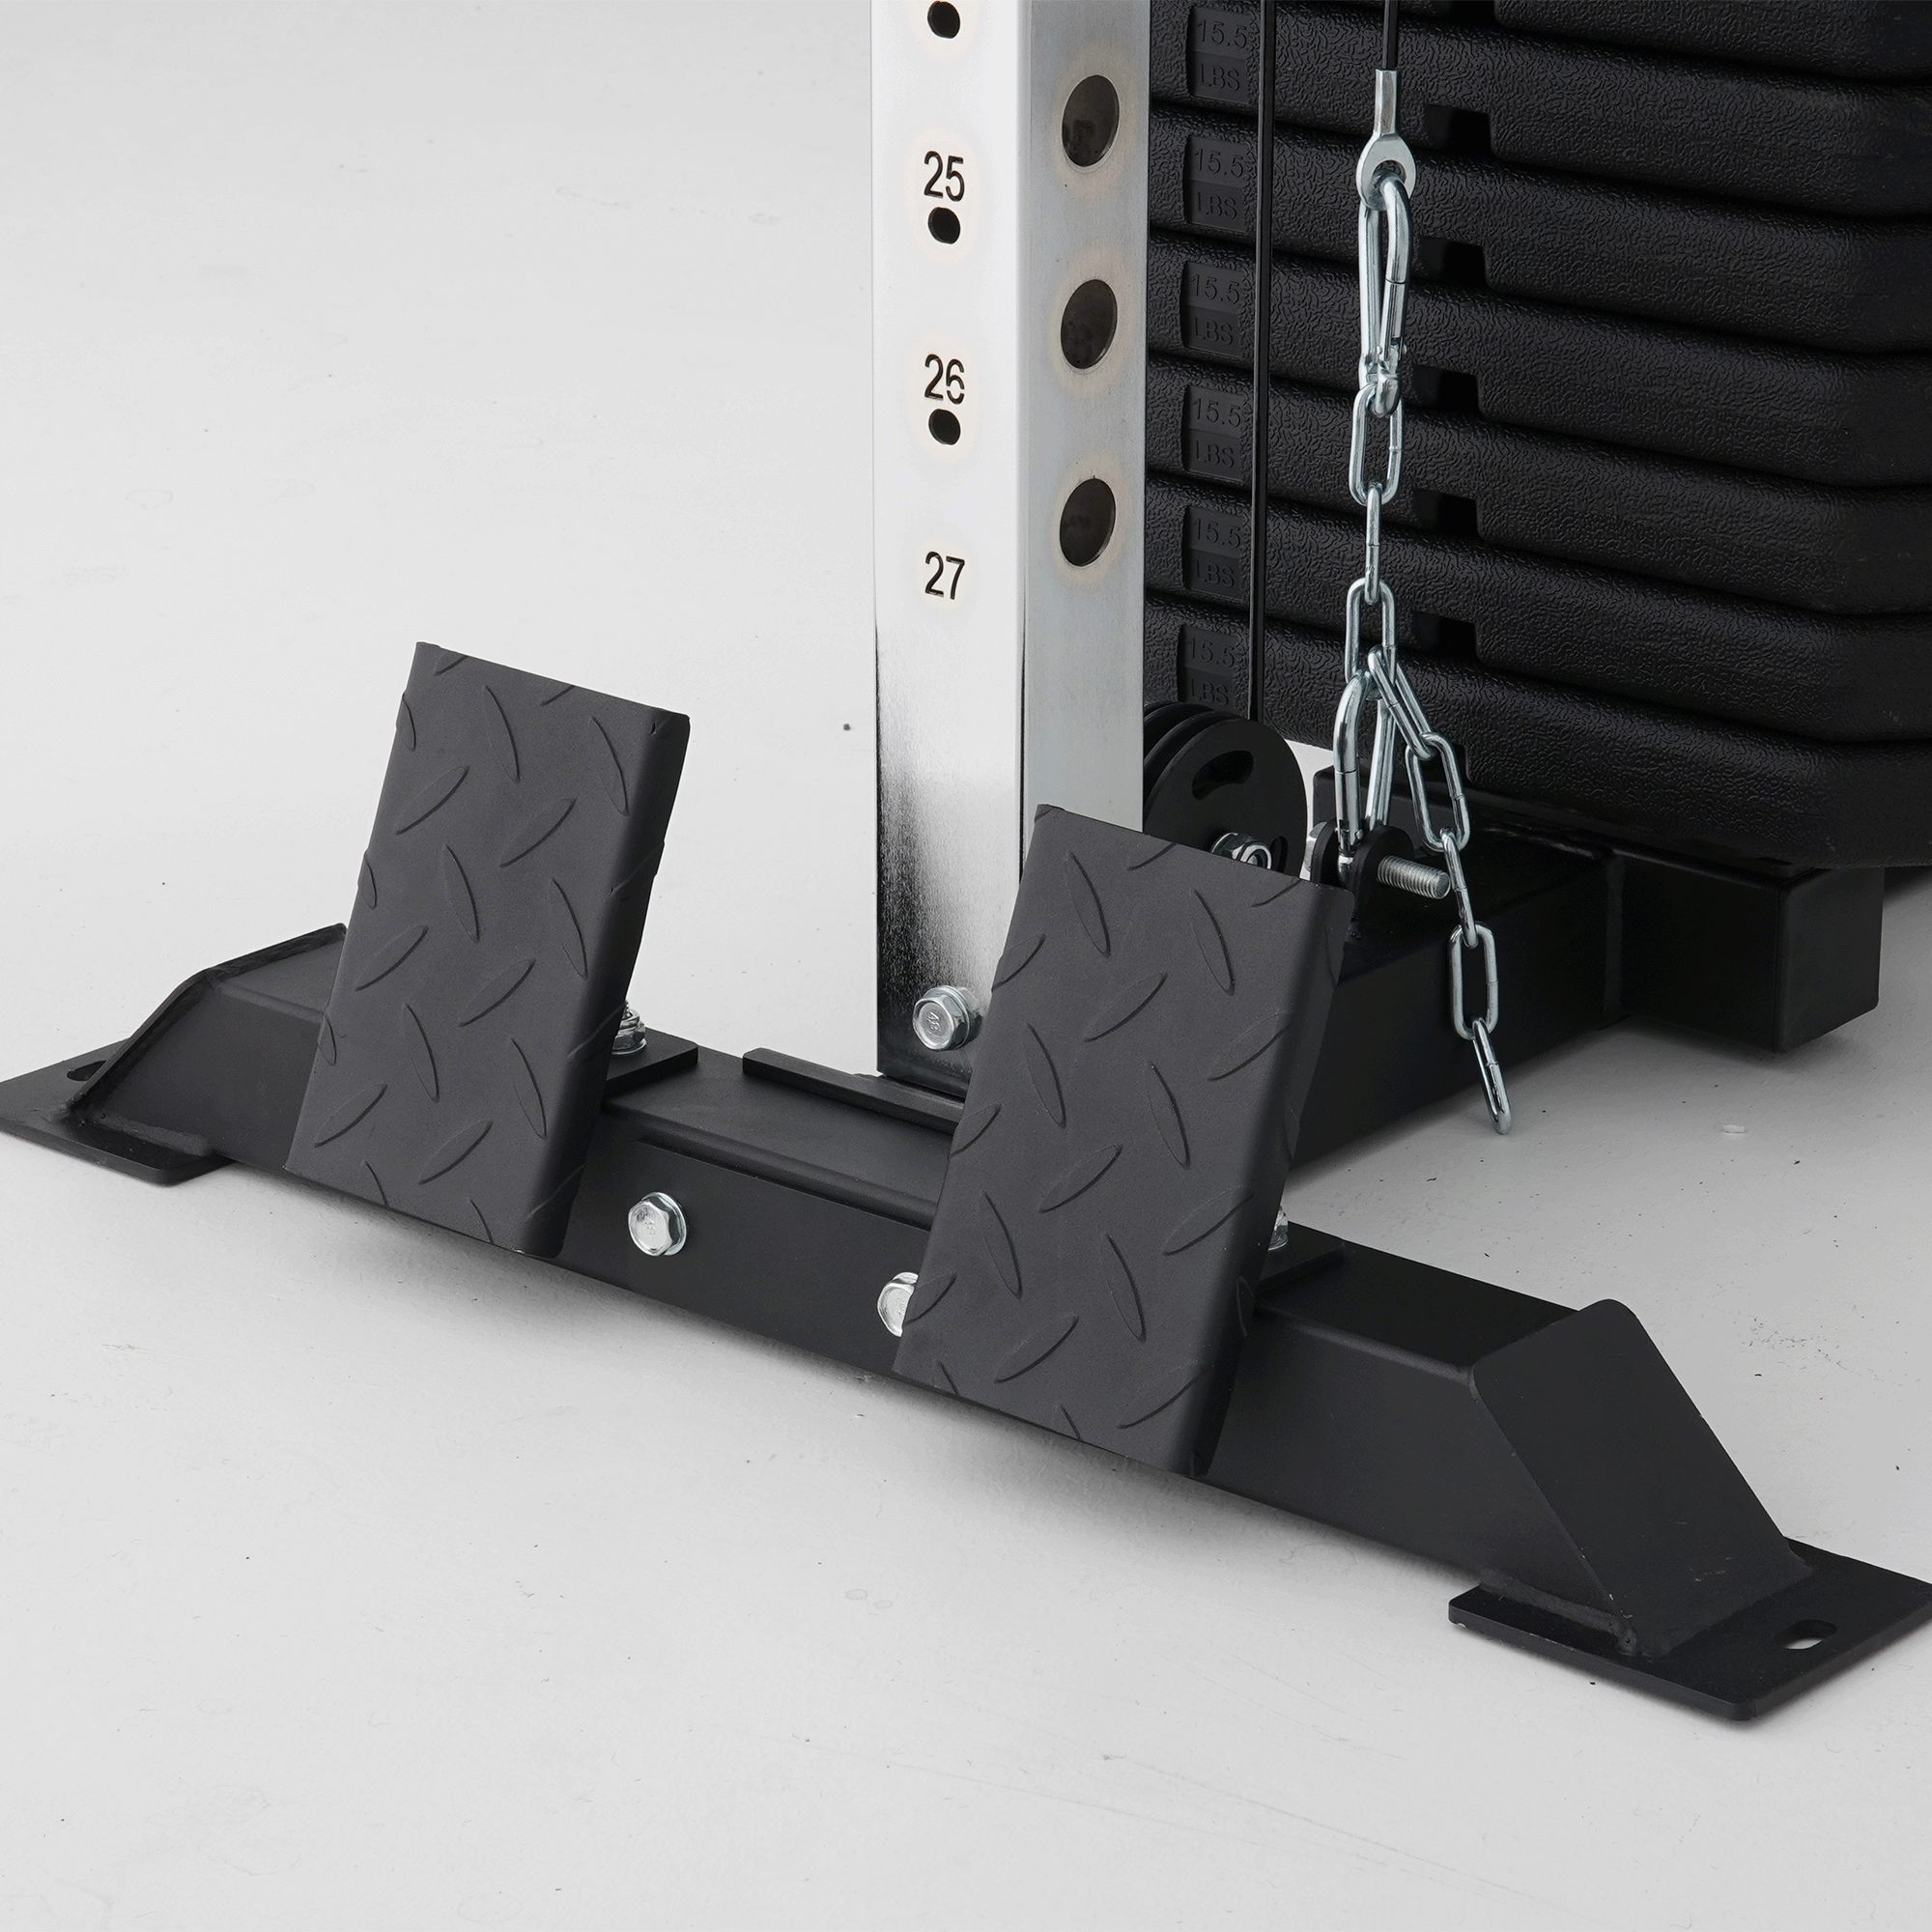 wall-mounted-lat-low-row-tower-weight-stack-mikolo-g4-pulley-anti-slip-footboard